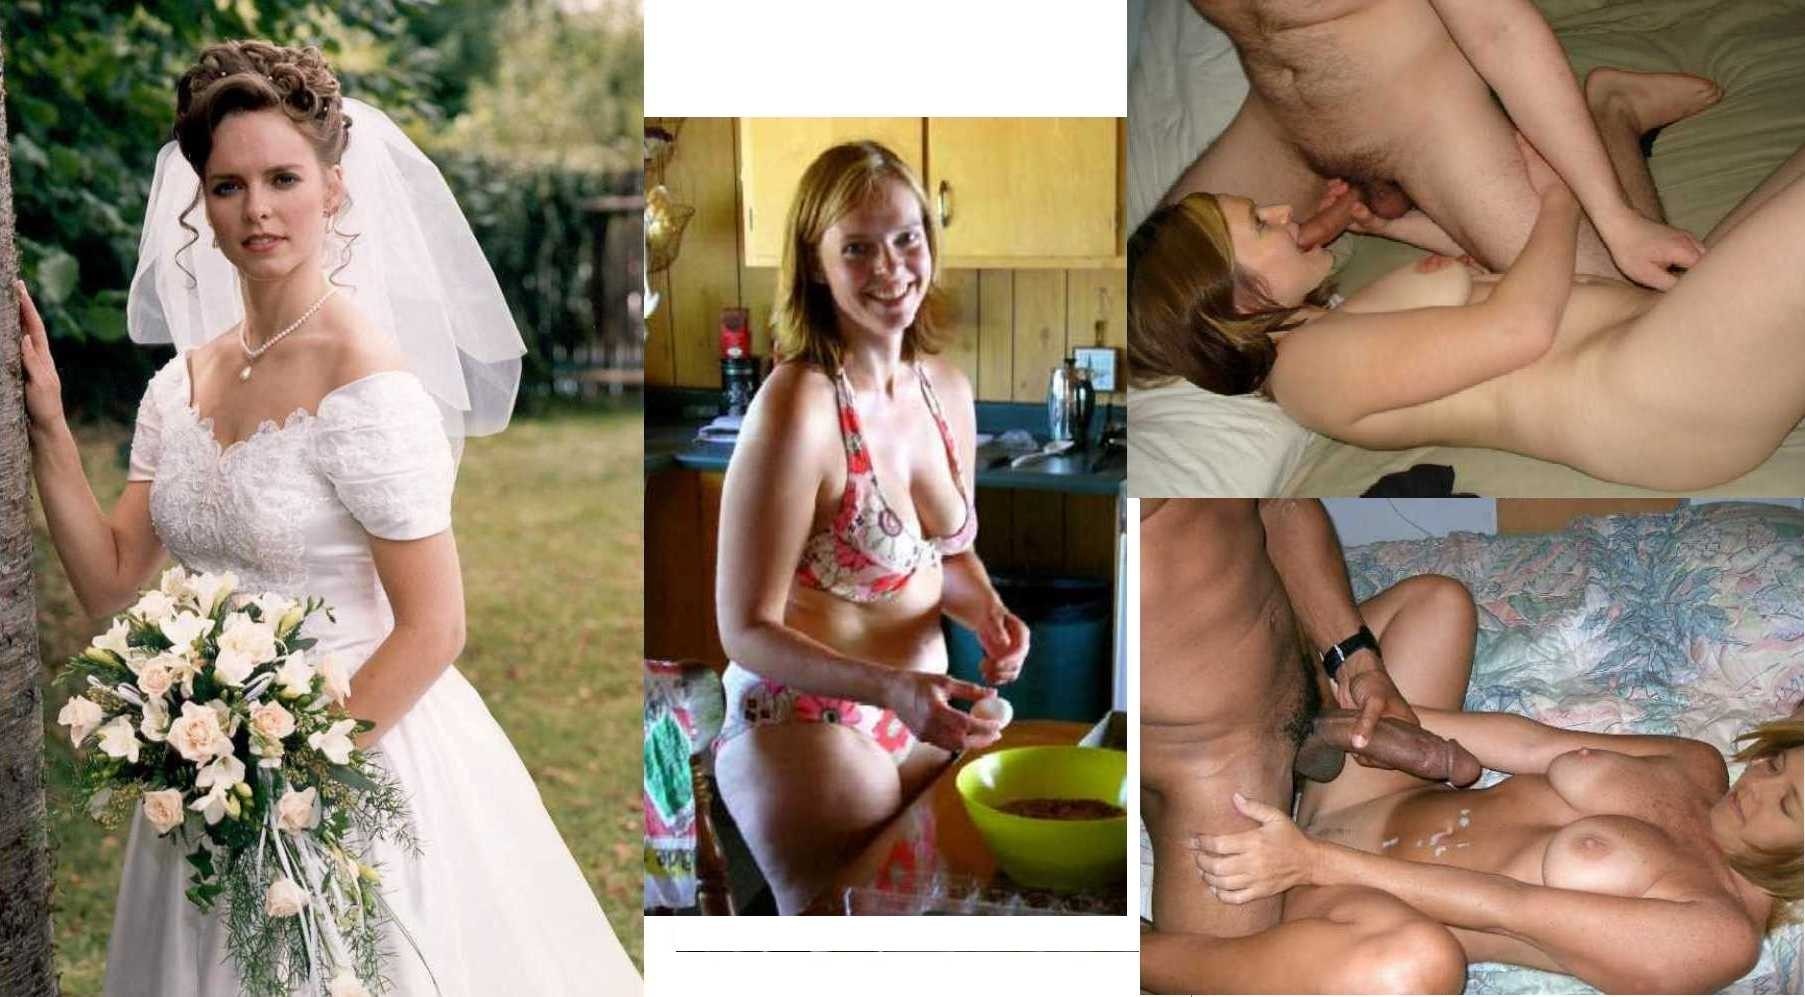 Fat Nude Wedding - Before and after Fucking (77 photos) - porn ddeva